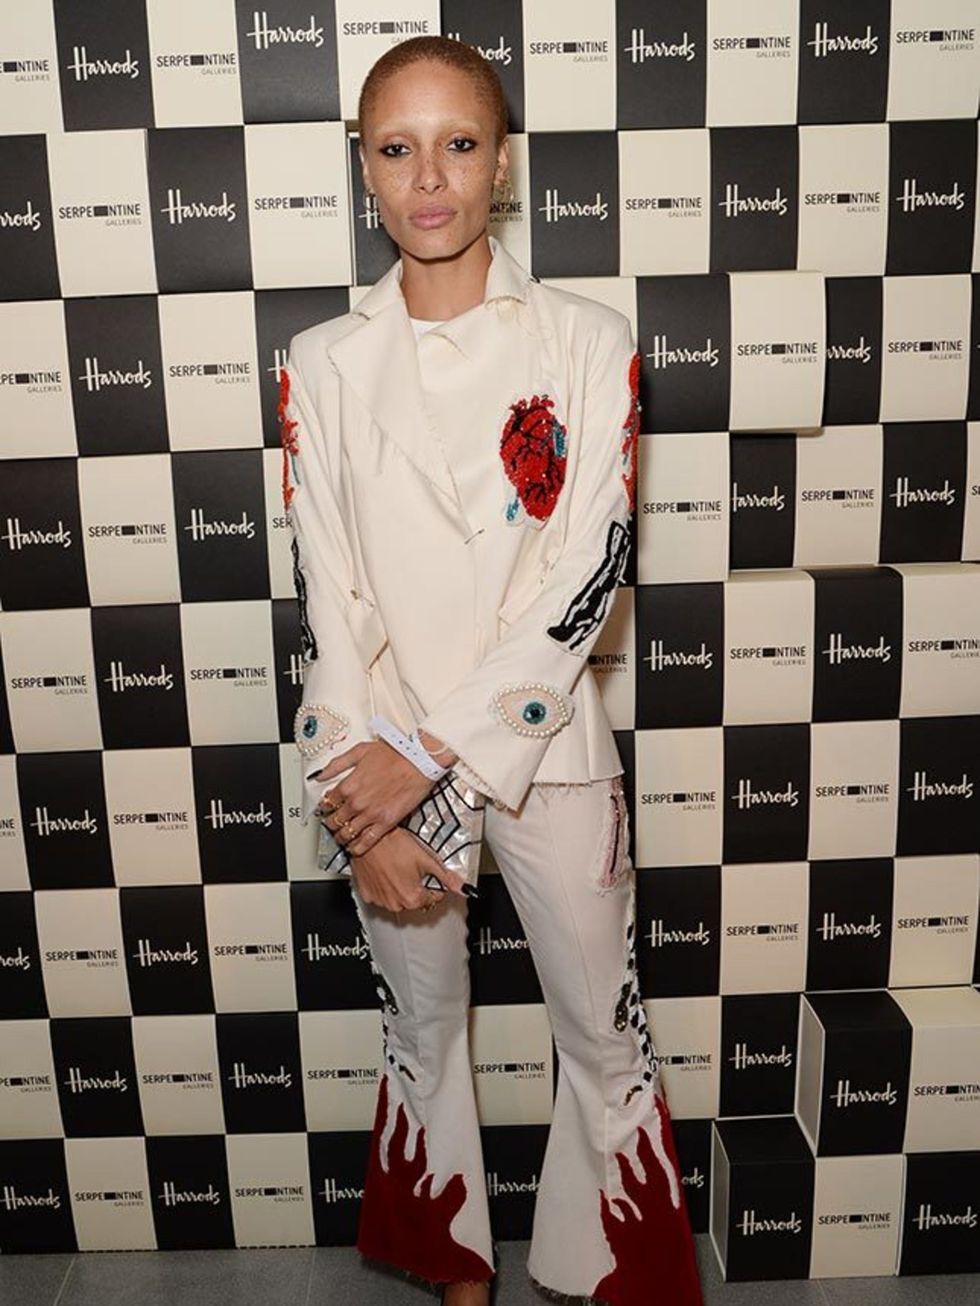 Adwoa Aboah attends the Serpentine Gallery and Harrods Future Contemporaries during London Fashion Week AW16